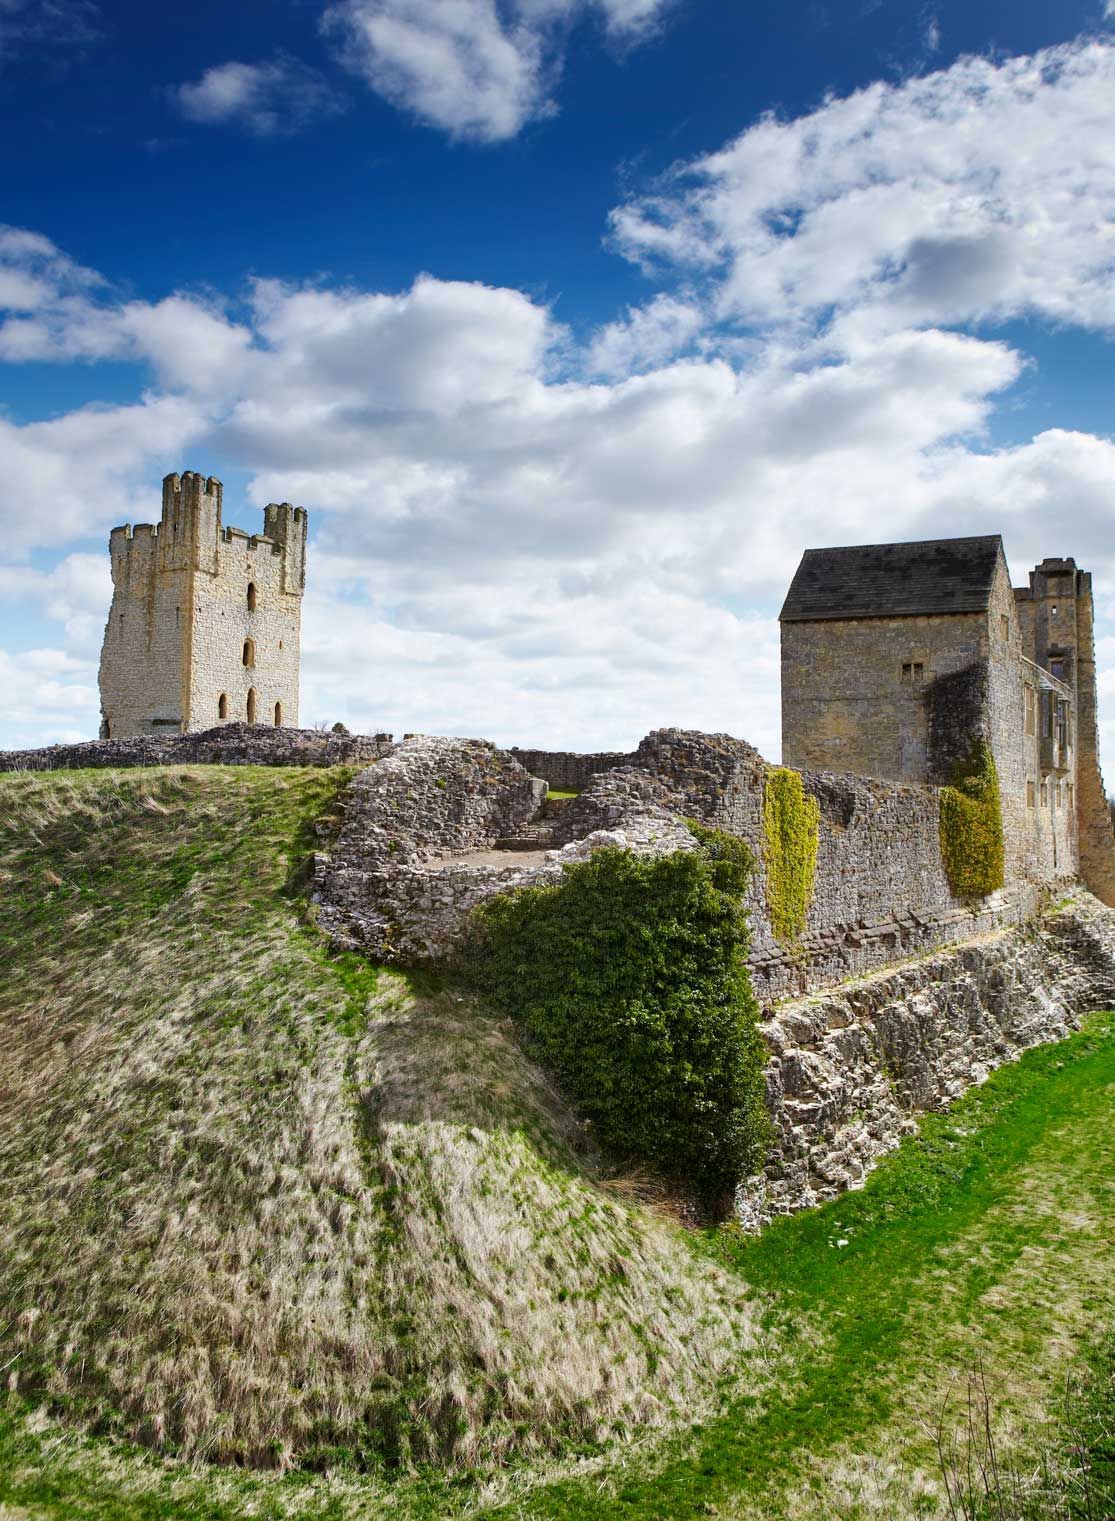 Ruins of a stone castle, otherwise known as Helmsley Castle. Credit English Heritage.